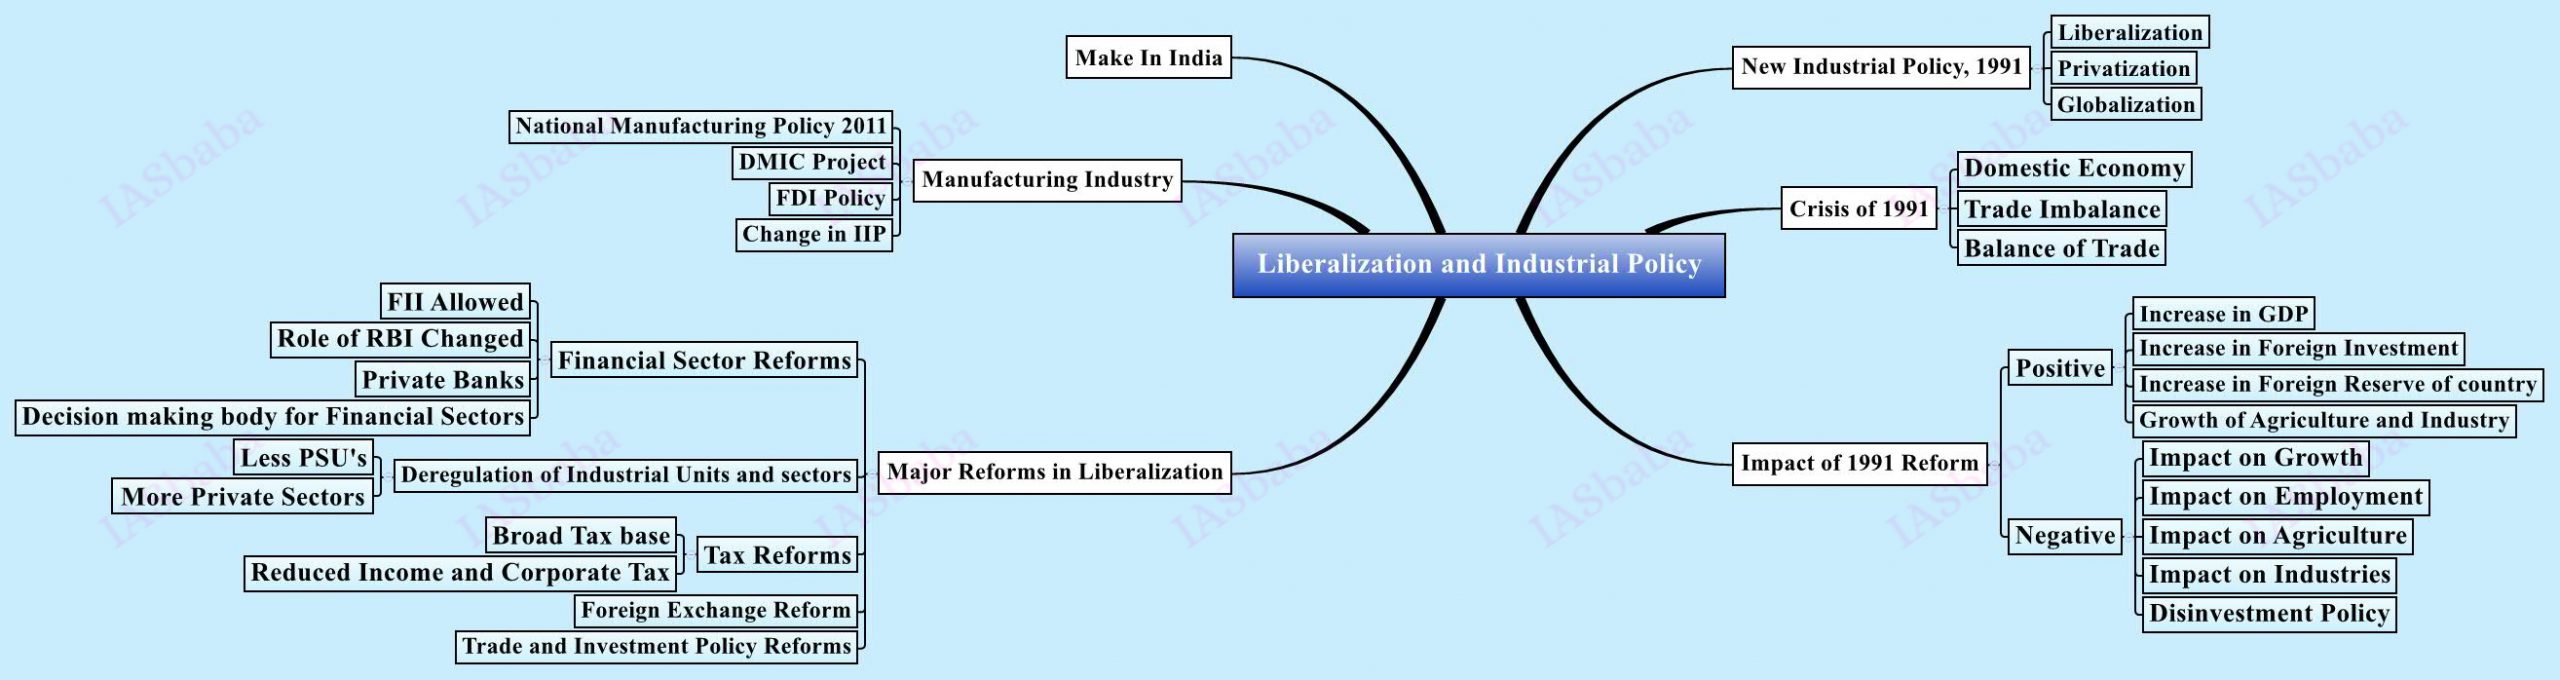 Liberalization-and-Industrial-Policy